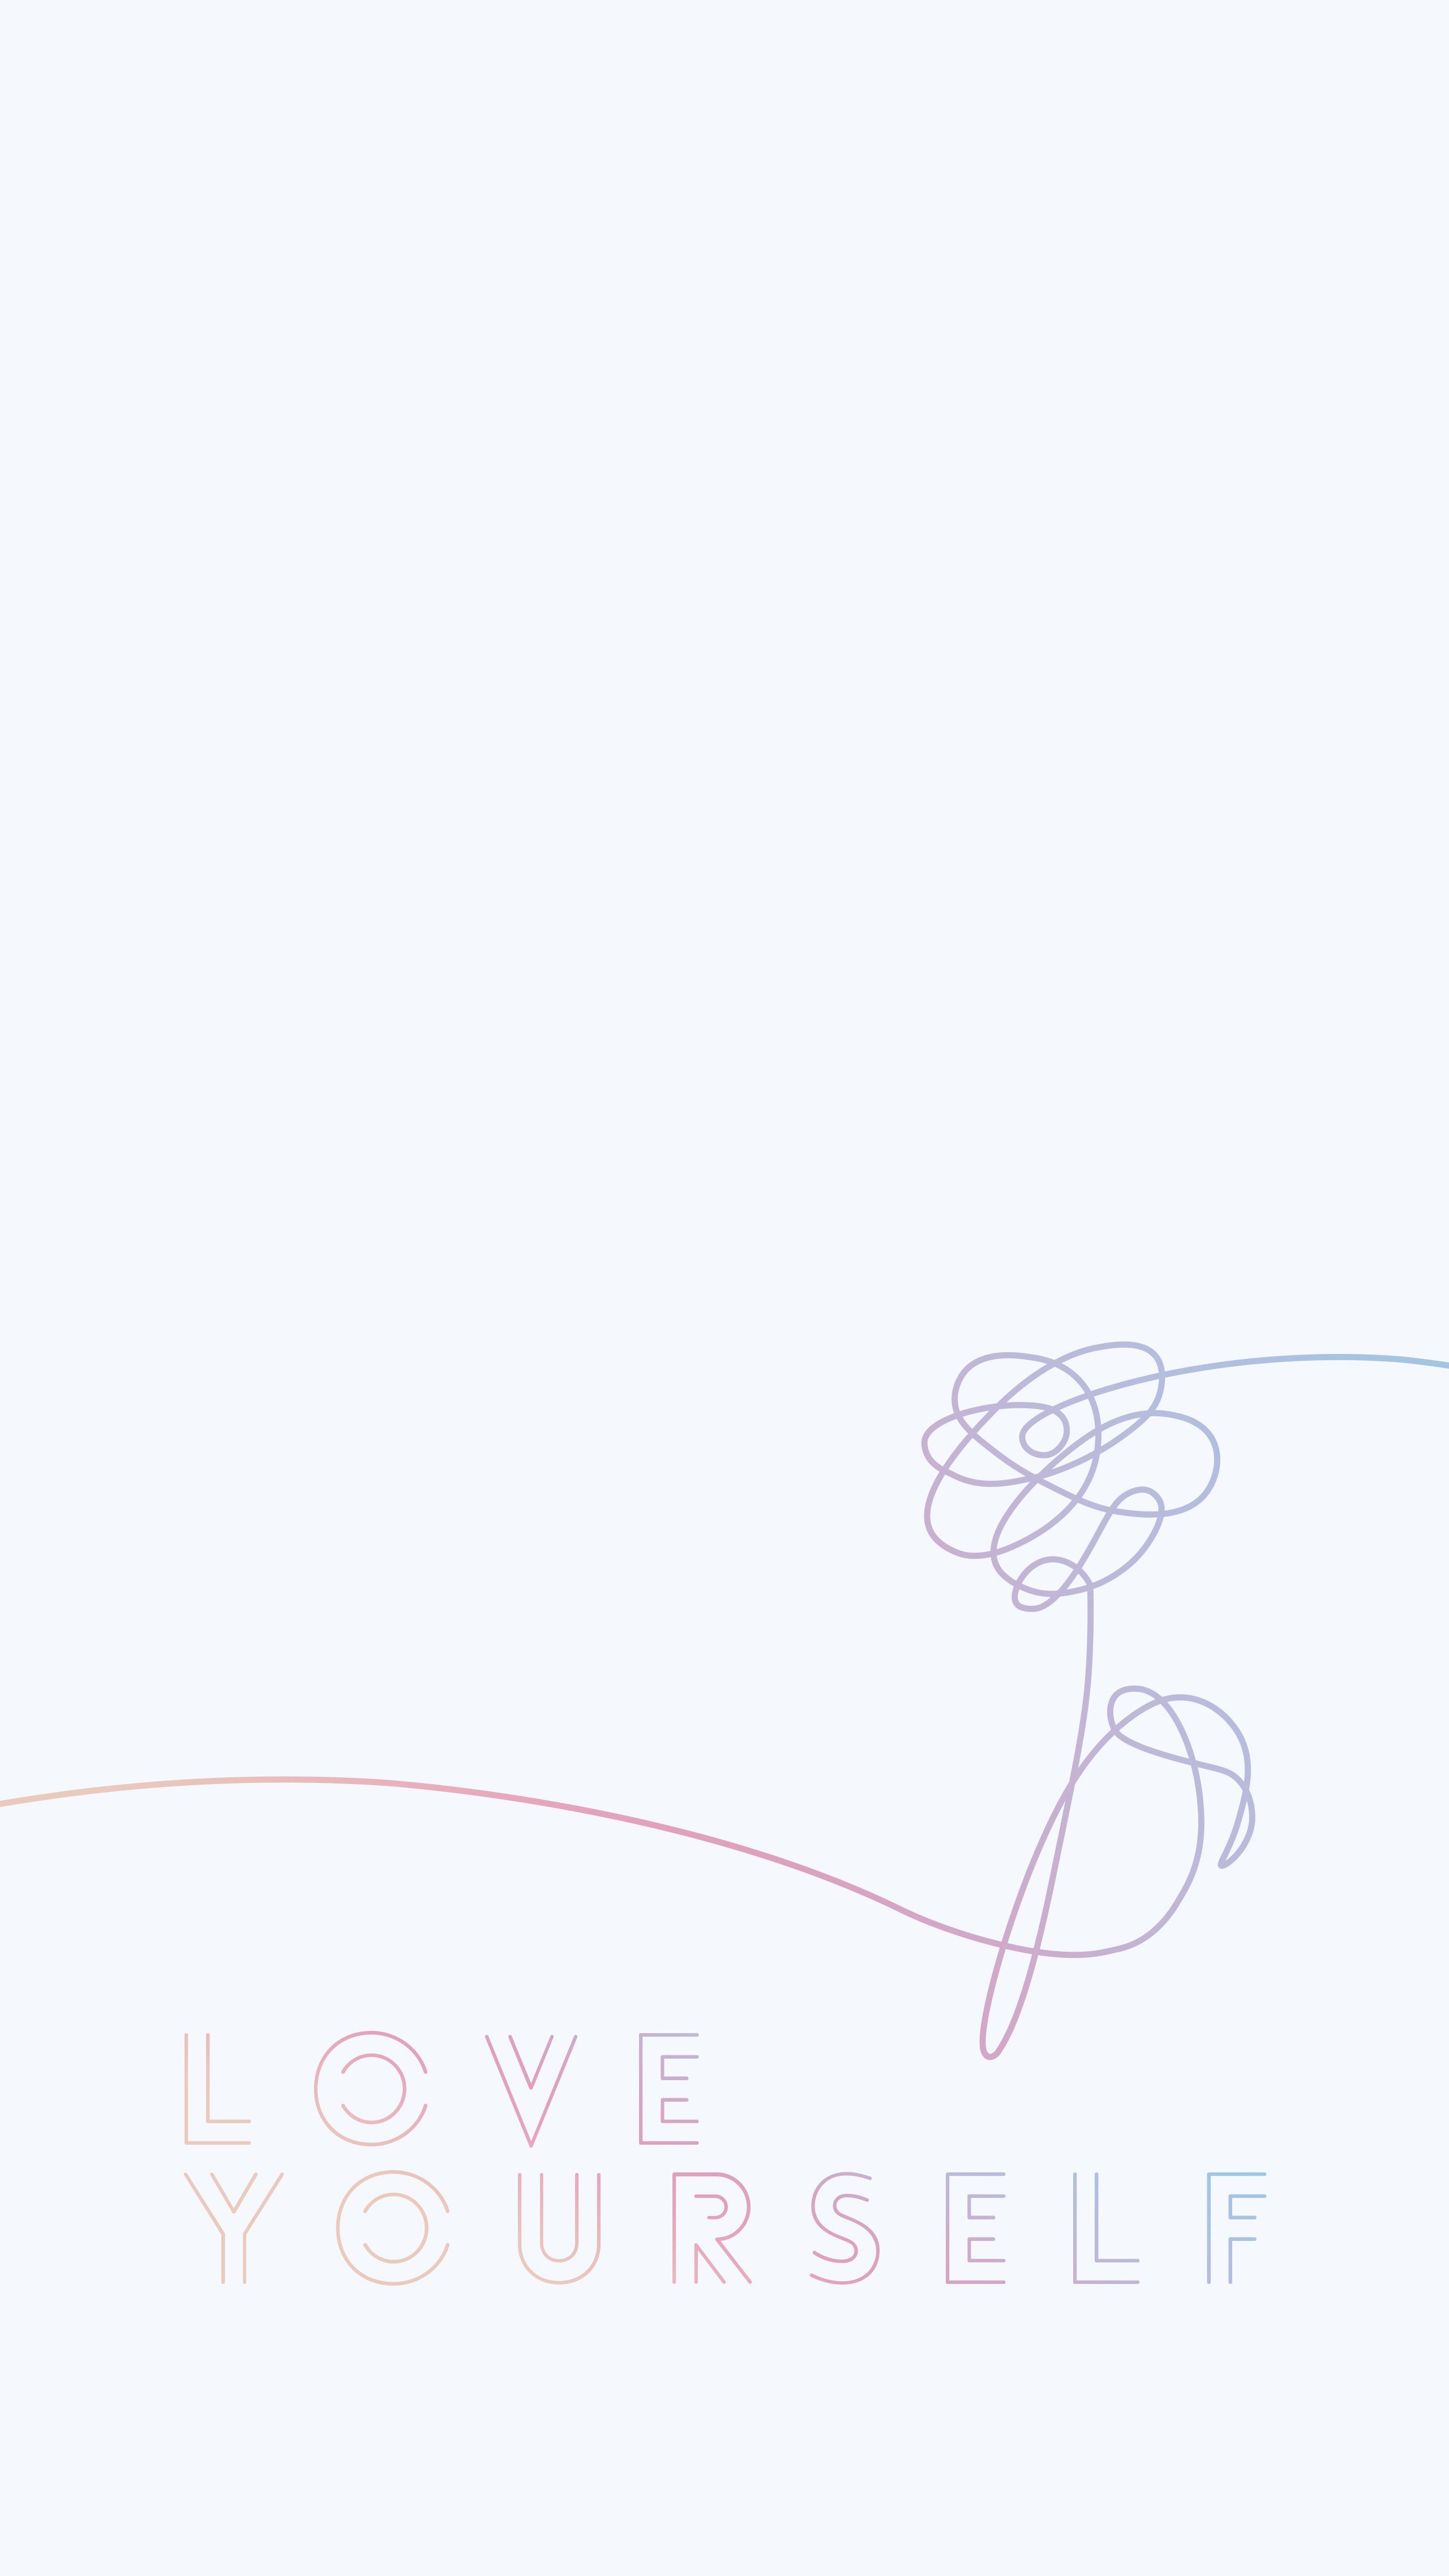 Bts drawing wallpaper for free download on Ayoqq.org